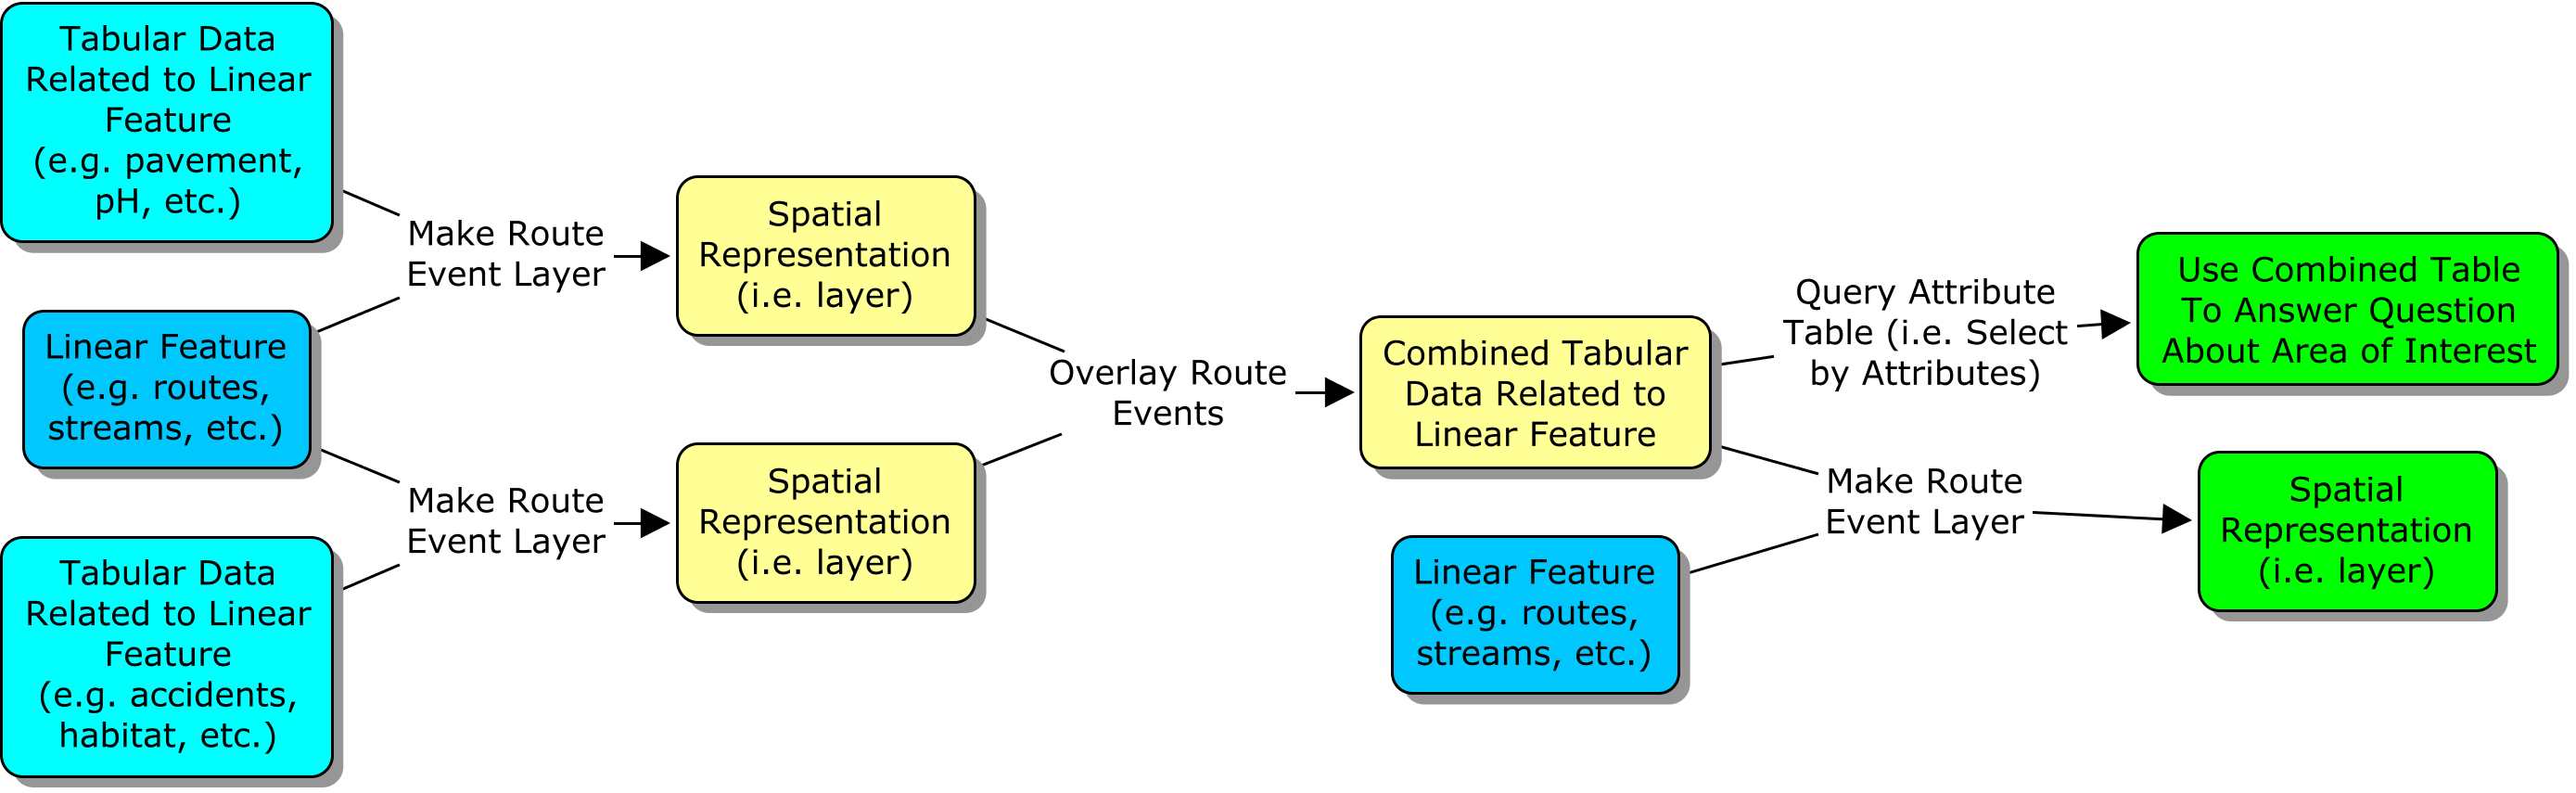 Linear referencing workflow diagram